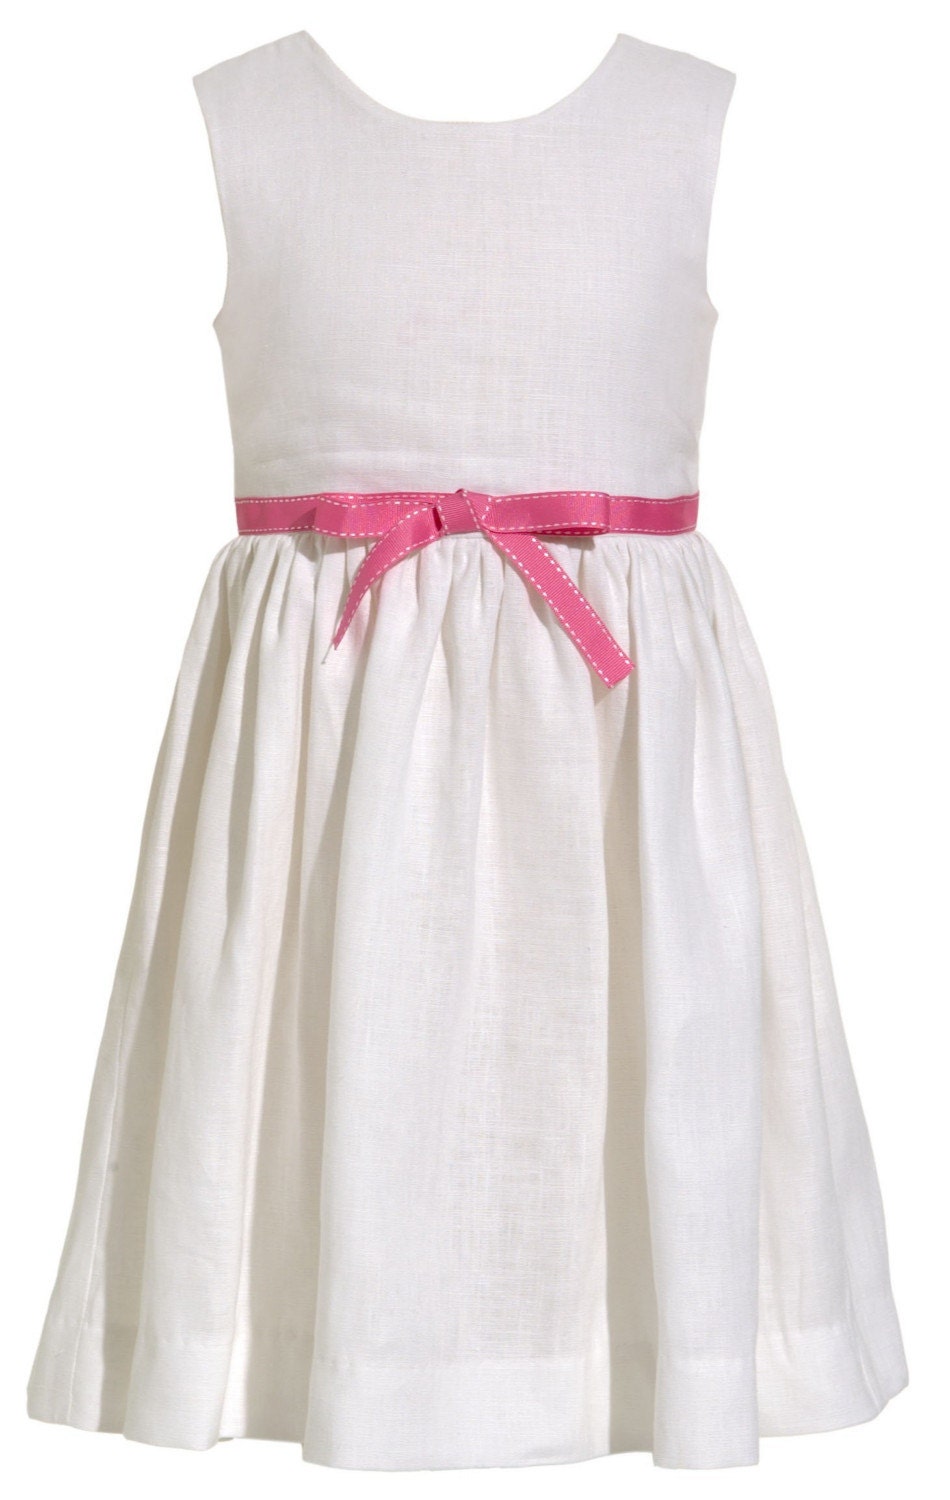 Vero Beach Dress - LIGHT PINK RIBBON AND MORE AVAILABLE